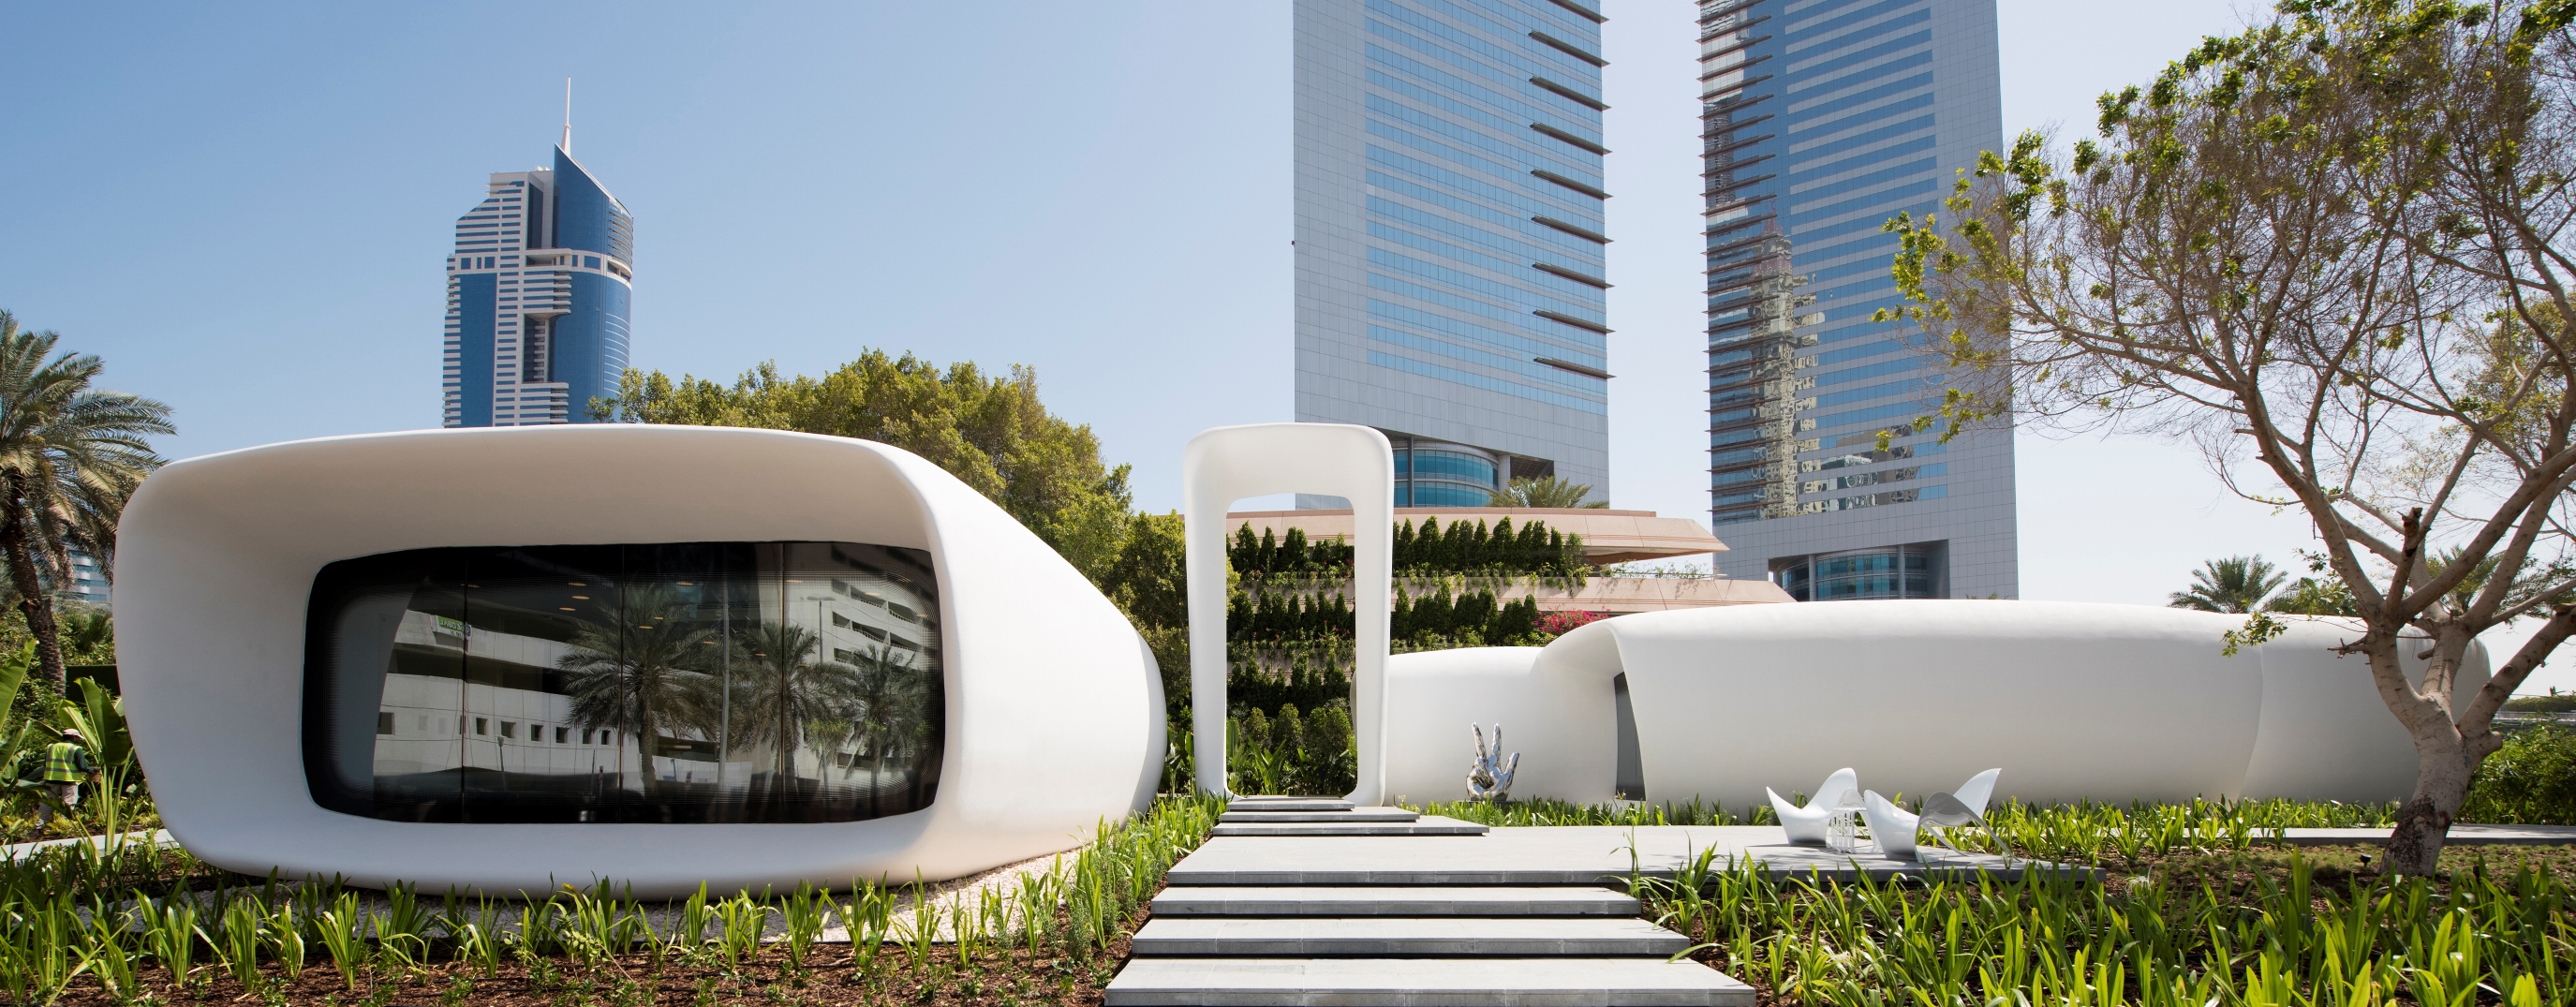 Siemens Technology Controls World’s First 3D-Printed Office Building in Dubai